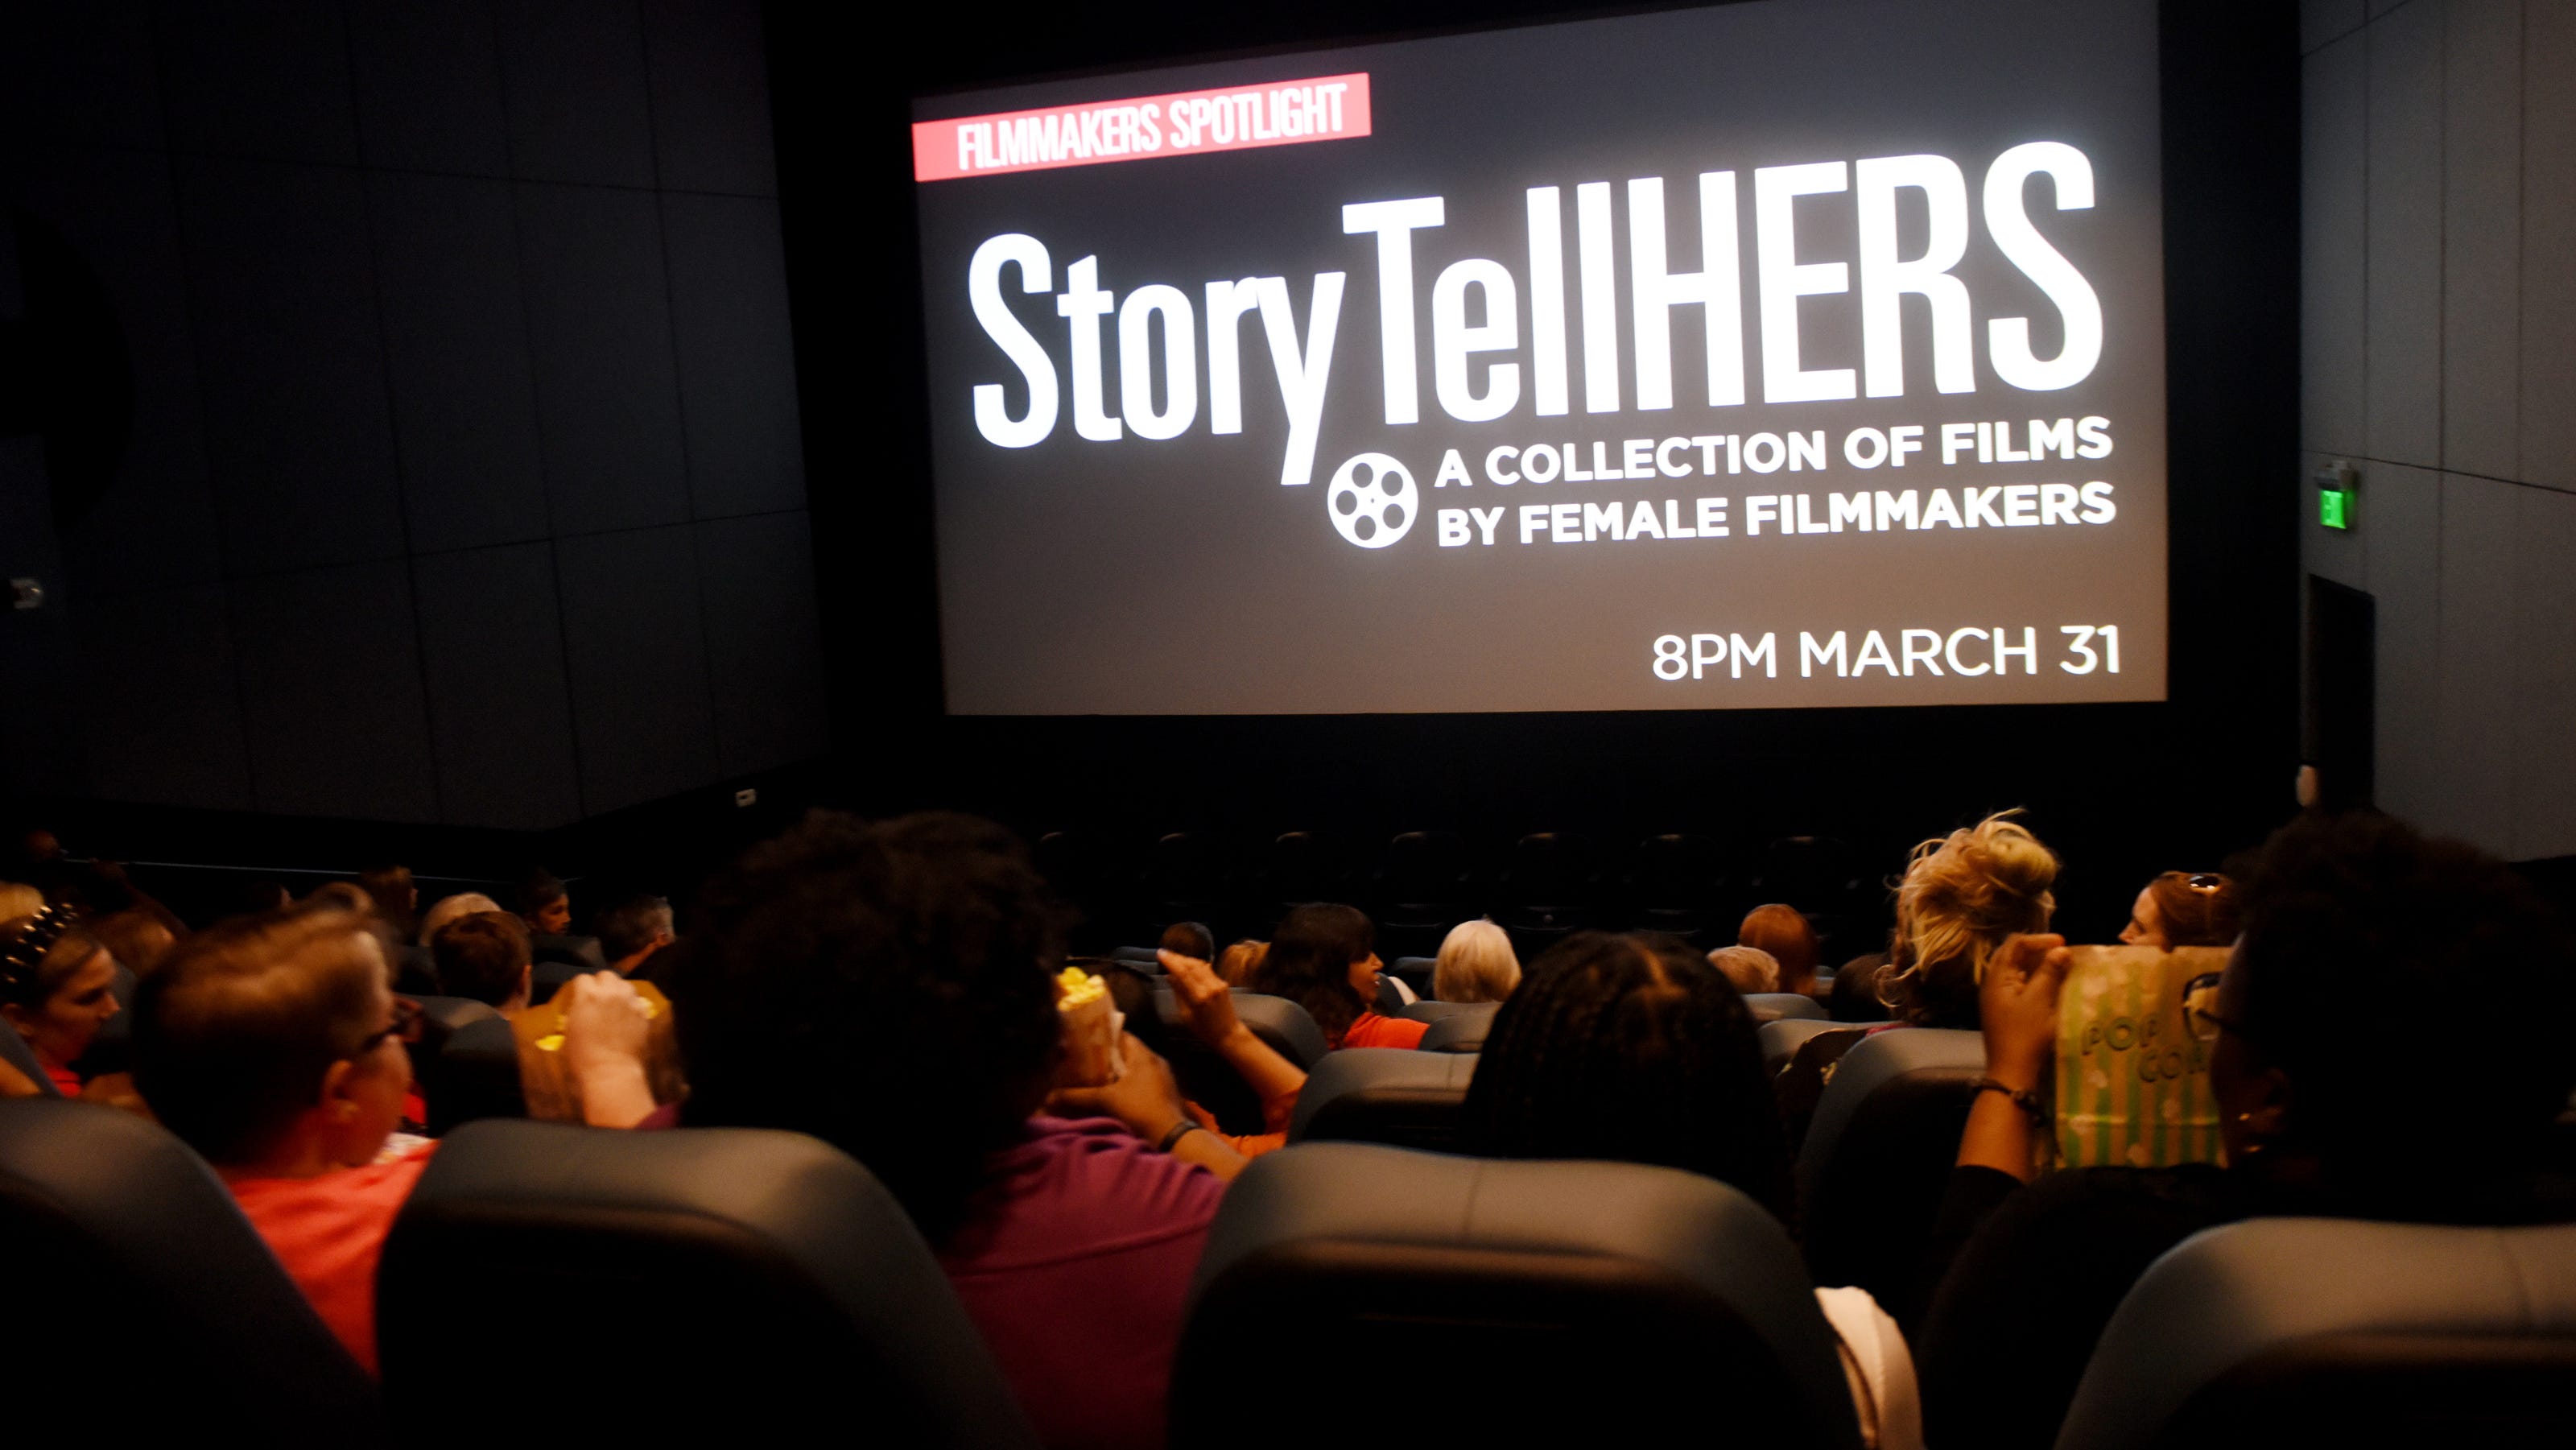  Meet the Shreveport filmmakers presenting at the second annual StorytellHERS event at RFC 